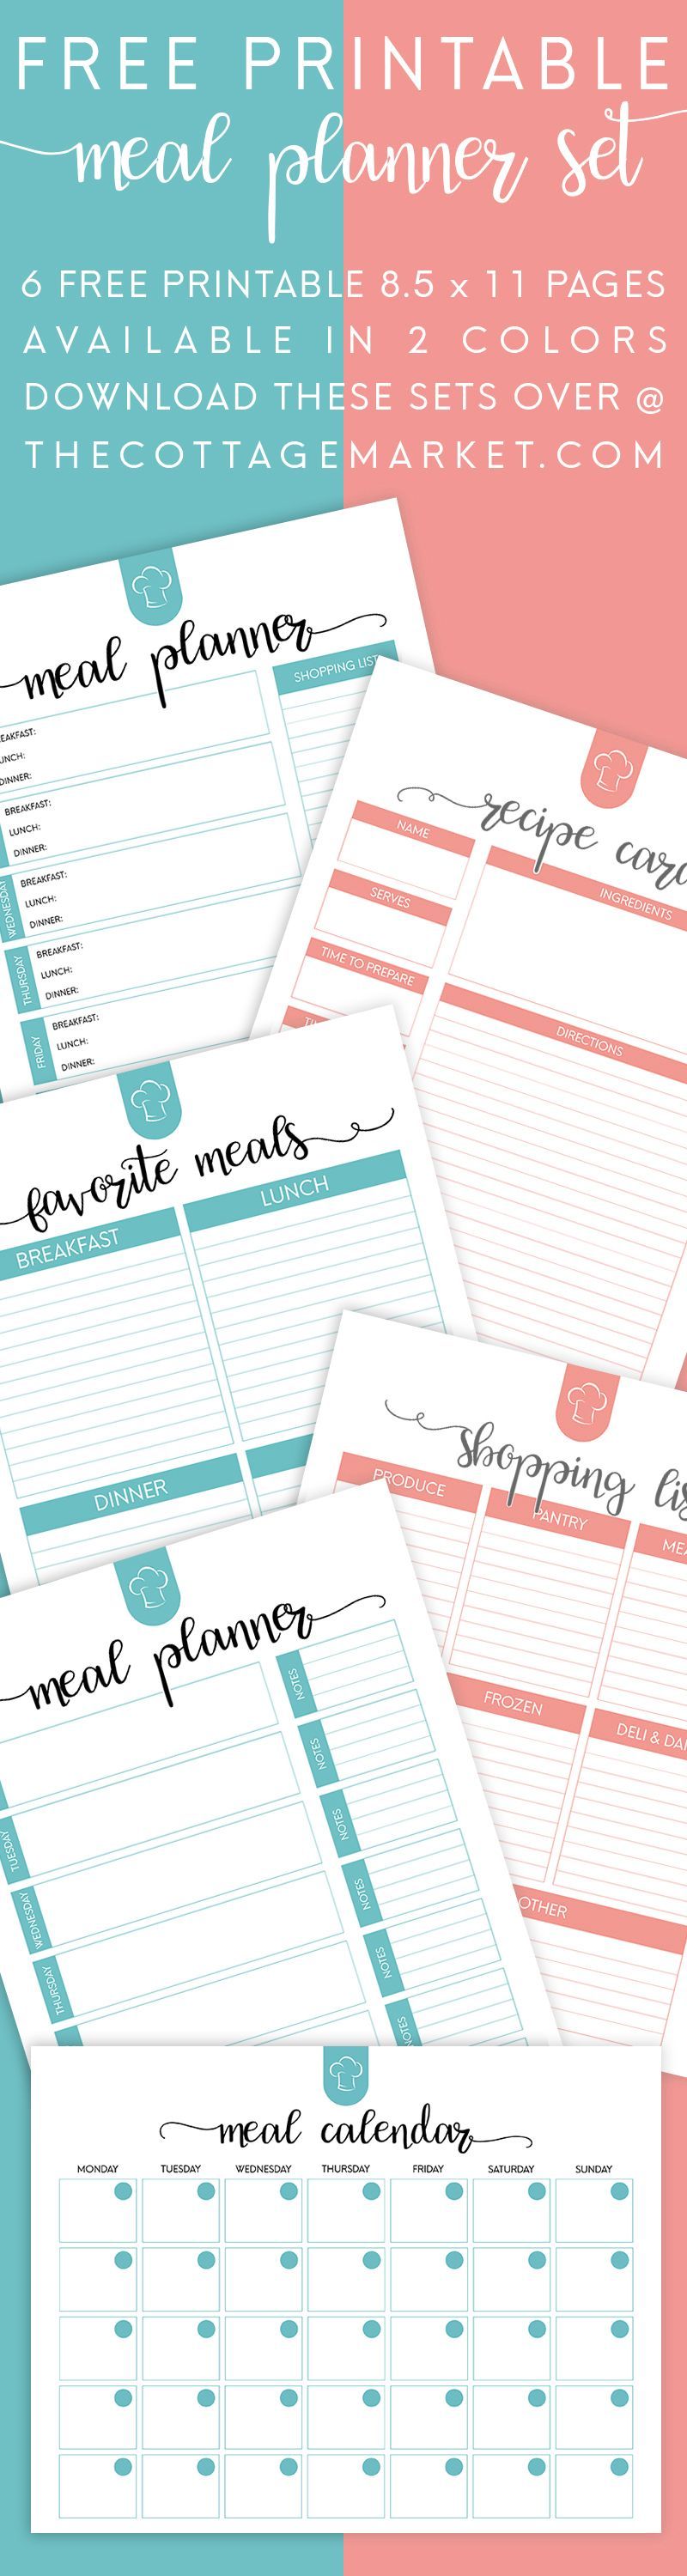 FREE Printable Meal Planner Set. 6 Free Printable 8 1/2 X 11 Pages Available In 2 Colors…Everything you need to organize your